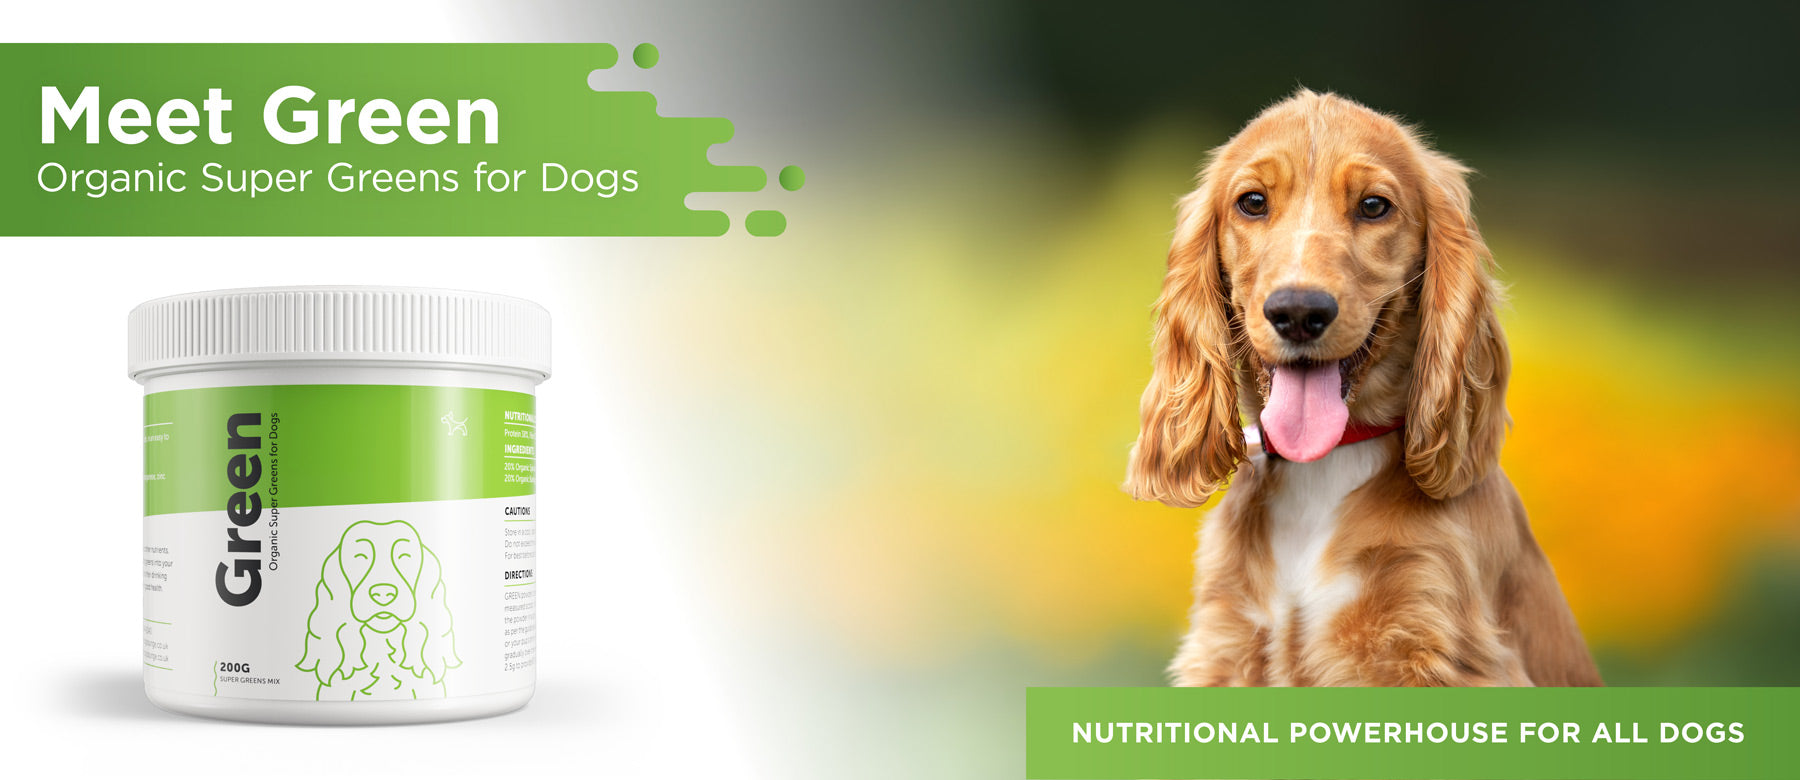 Green organic super greens supplement for dogs 